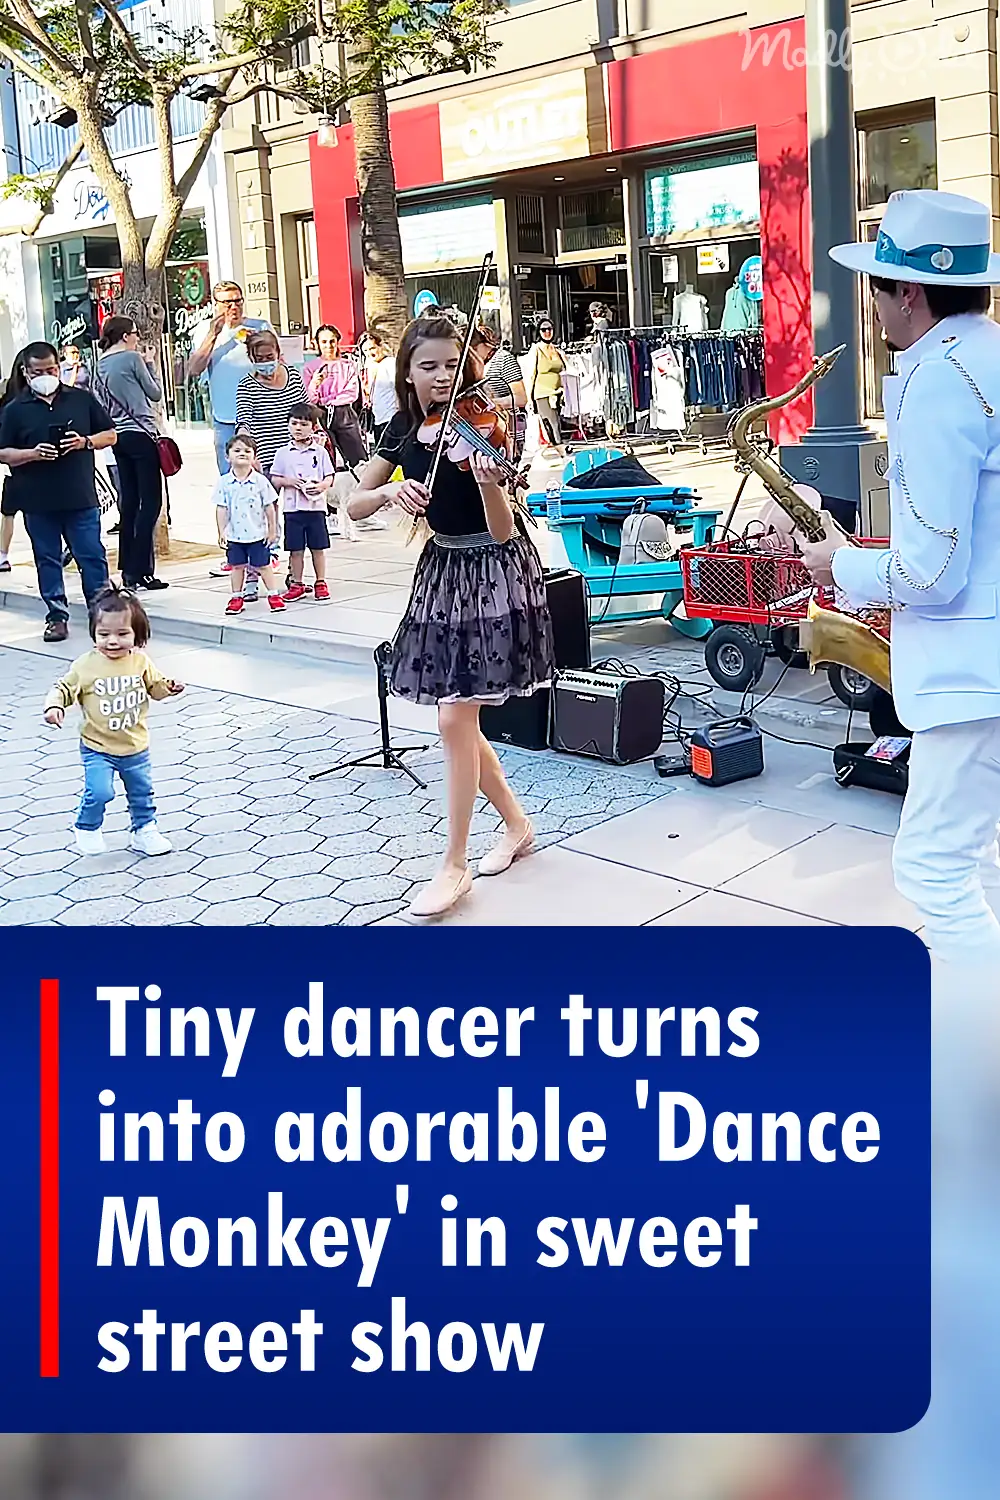 Tiny dancer turns into adorable 'Dance Monkey' in sweet street show